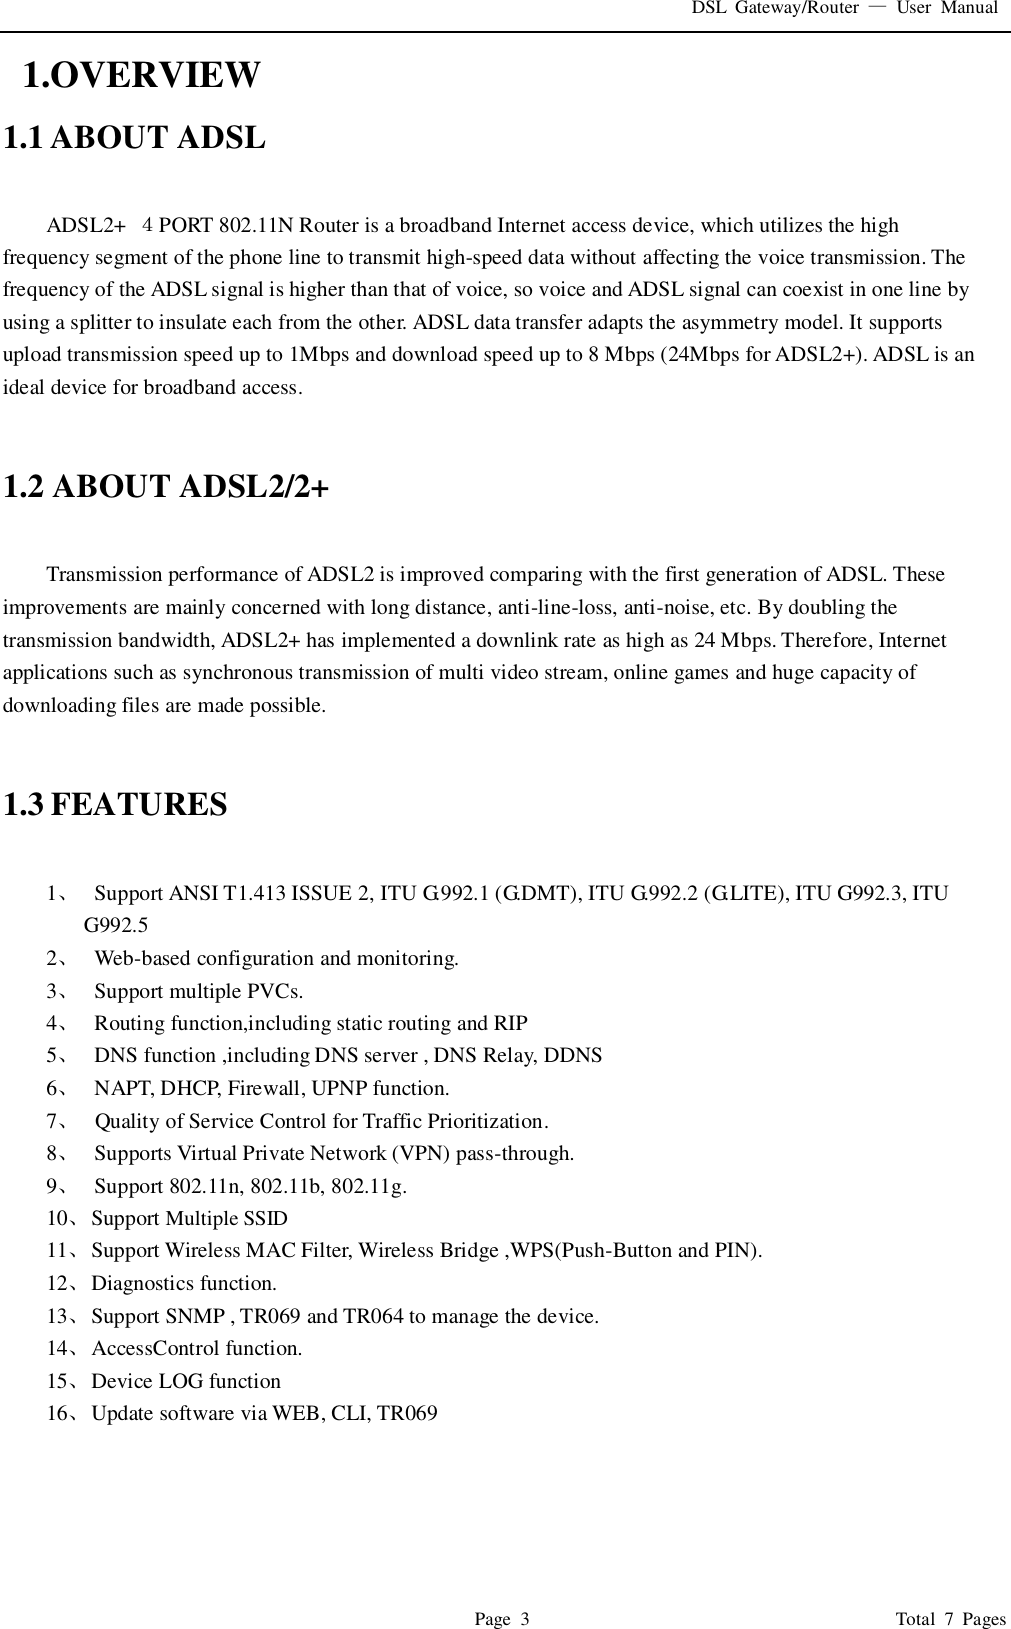 DSL  Gateway/Router  —  User  Manual   Page  3                                                                              Total  7  Pages   1.OVERVIEW 1.1 ABOUT ADSL  ADSL2+  ４PORT 802.11N Router is a broadband Internet access device, which utilizes the high frequency segment of the phone line to transmit high-speed data without affecting the voice transmission. The frequency of the ADSL signal is higher than that of voice, so voice and ADSL signal can coexist in one line by using a splitter to insulate each from the other. ADSL data transfer adapts the asymmetry model. It supports upload transmission speed up to 1Mbps and download speed up to 8 Mbps (24Mbps for ADSL2+). ADSL is an ideal device for broadband access.   1.2 ABOUT ADSL2/2+  Transmission performance of ADSL2 is improved comparing with the first generation of ADSL. These improvements are mainly concerned with long distance, anti-line-loss, anti-noise, etc. By doubling the transmission bandwidth, ADSL2+ has implemented a downlink rate as high as 24 Mbps. Therefore, Internet applications such as synchronous transmission of multi video stream, online games and huge capacity of downloading files are made possible.   1.3 FEATURES  1、   Support ANSI T1.413 ISSUE 2, ITU G.992.1 (G.DMT), ITU G.992.2 (G.LITE), ITU G992.3, ITU G992.5 2、   Web-based configuration and monitoring. 3、   Support multiple PVCs. 4、   Routing function,including static routing and RIP 5、   DNS function ,including DNS server , DNS Relay, DDNS 6、   NAPT, DHCP, Firewall, UPNP function. 7、   Quality of Service Control for Traffic Prioritization. 8、   Supports Virtual Private Network (VPN) pass-through. 9、   Support 802.11n, 802.11b, 802.11g. 10、 Support Multiple SSID 11、 Support Wireless MAC Filter, Wireless Bridge ,WPS(Push-Button and PIN). 12、 Diagnostics function. 13、 Support SNMP , TR069 and TR064 to manage the device. 14、 AccessControl function. 15、 Device LOG function 16、 Update software via WEB, CLI, TR069     